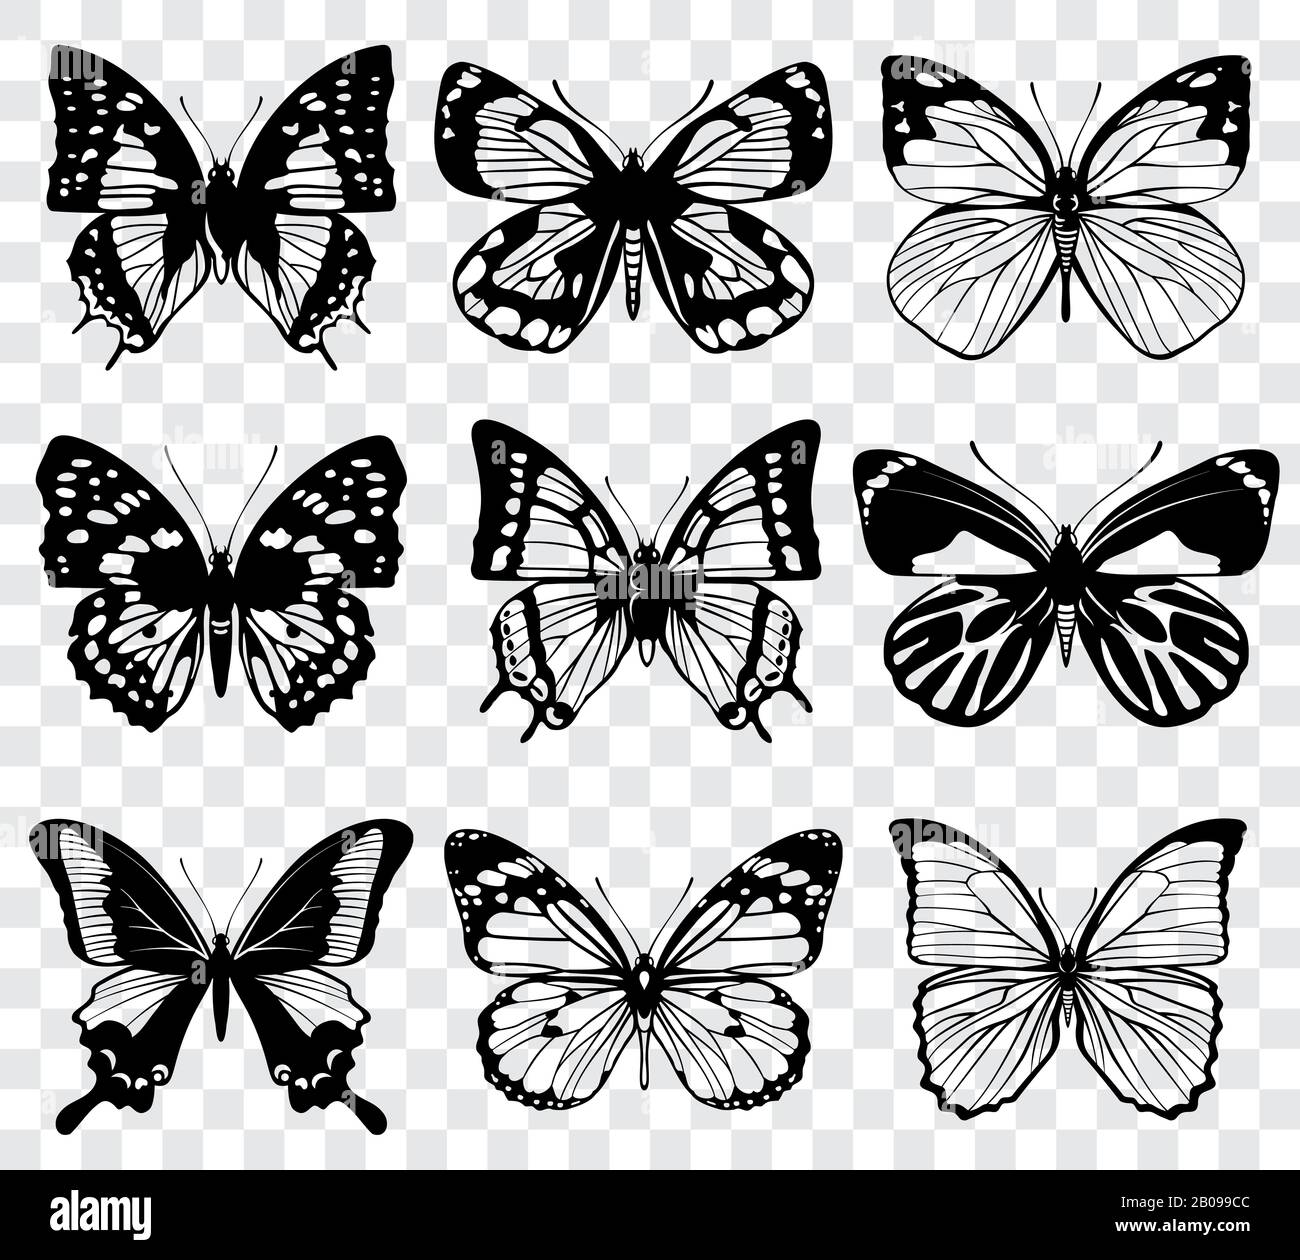 Vector butterflies isolated on transparent checkered background. Silhouette black butterflies, collection of vintage butterfly illustration Stock Vector